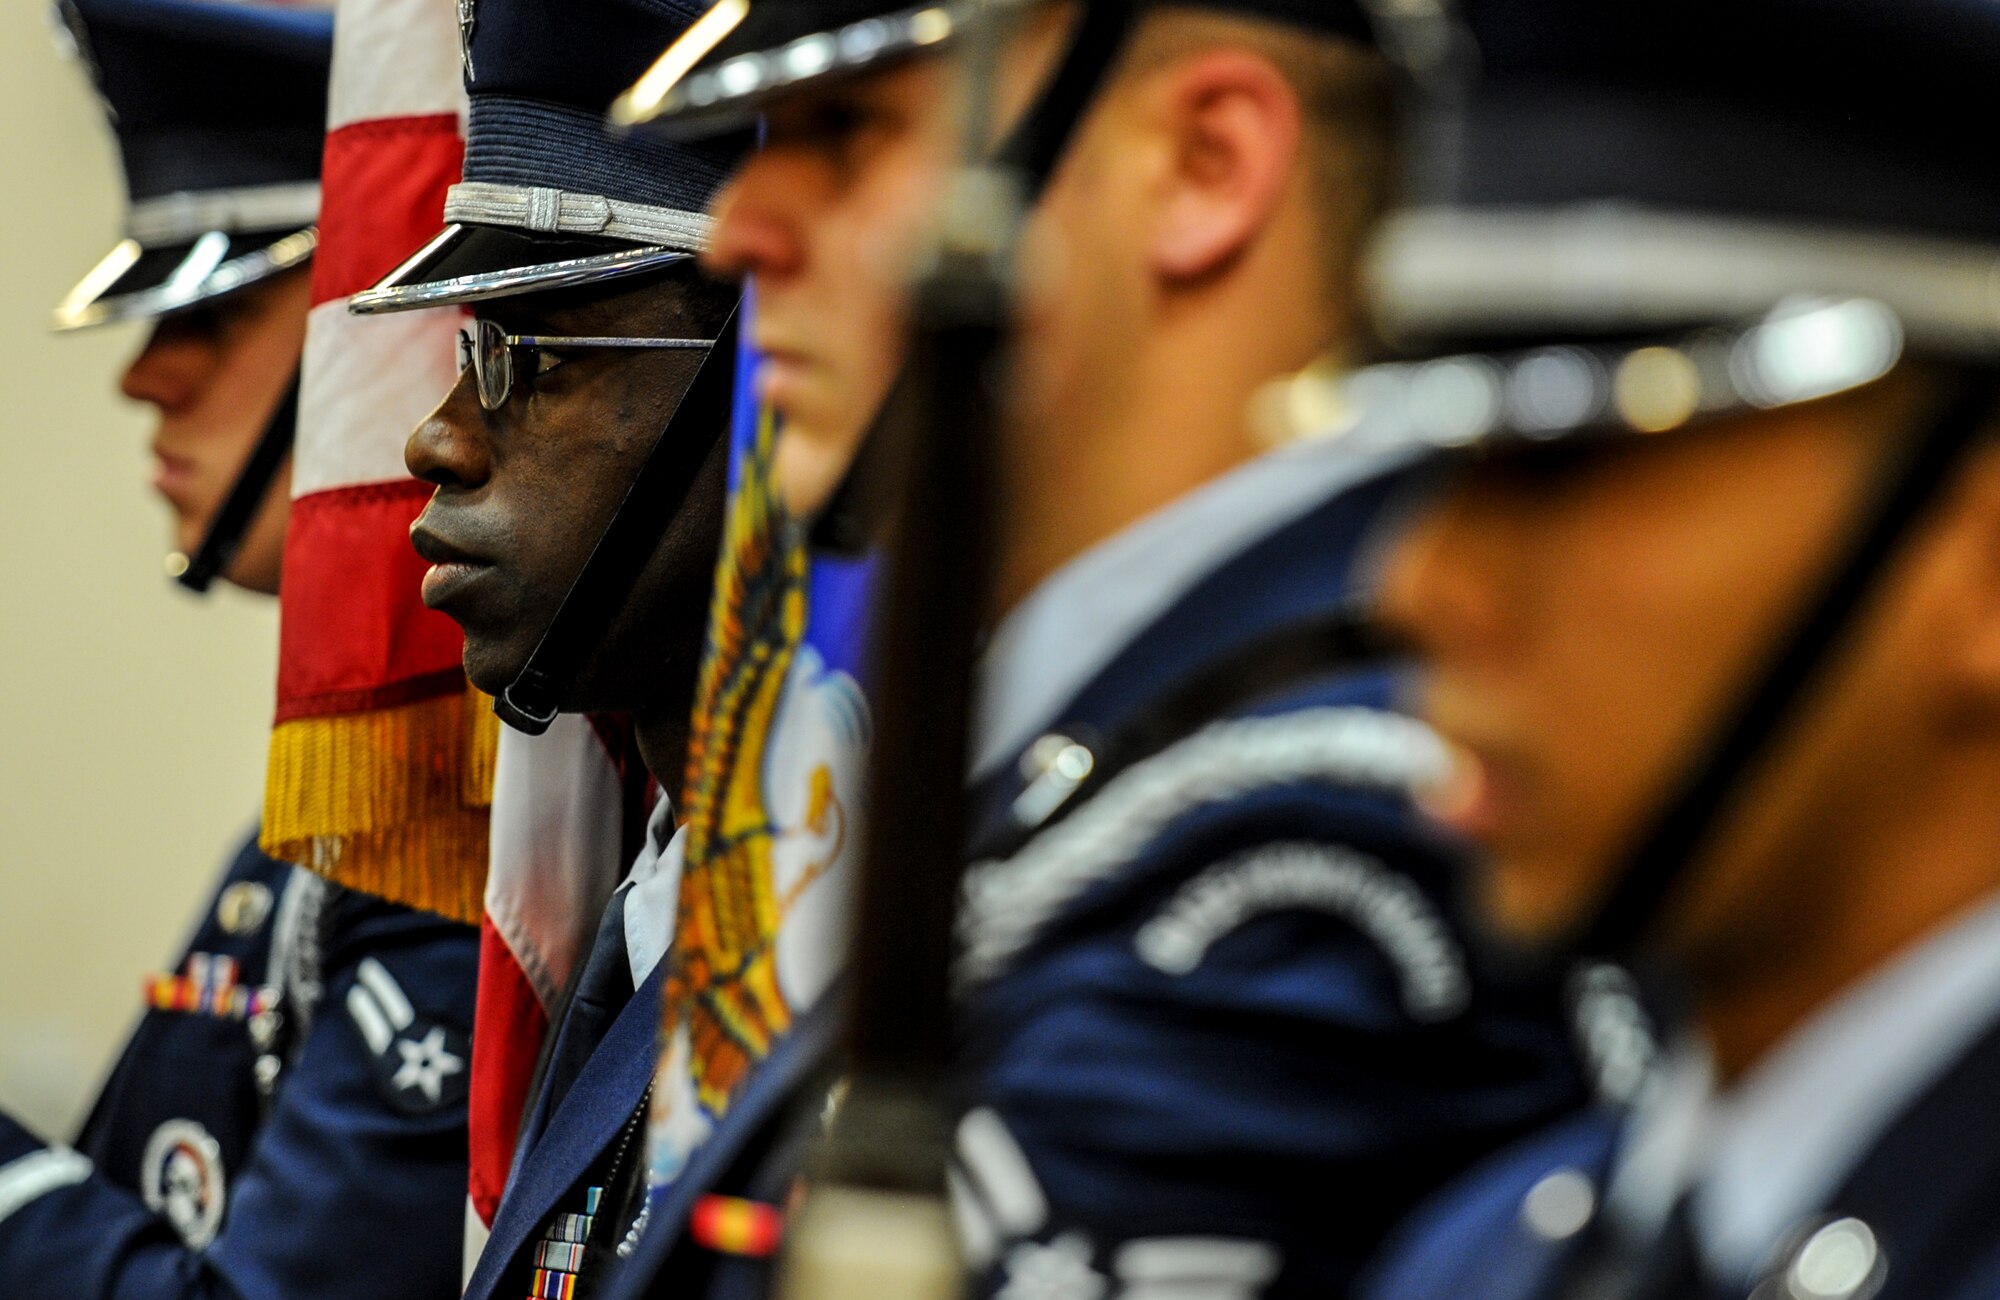 The Hurlburt Field honor guard posts the colors during an NCO-induction ceremony at Hurlburt Field, Fla., Nov. 26, 2014. An NCO-Induction ceremony is a time-honored tradition of welcoming the newest military leaders. (U.S. Air Force photo/Senior Airman Christopher Callaway)